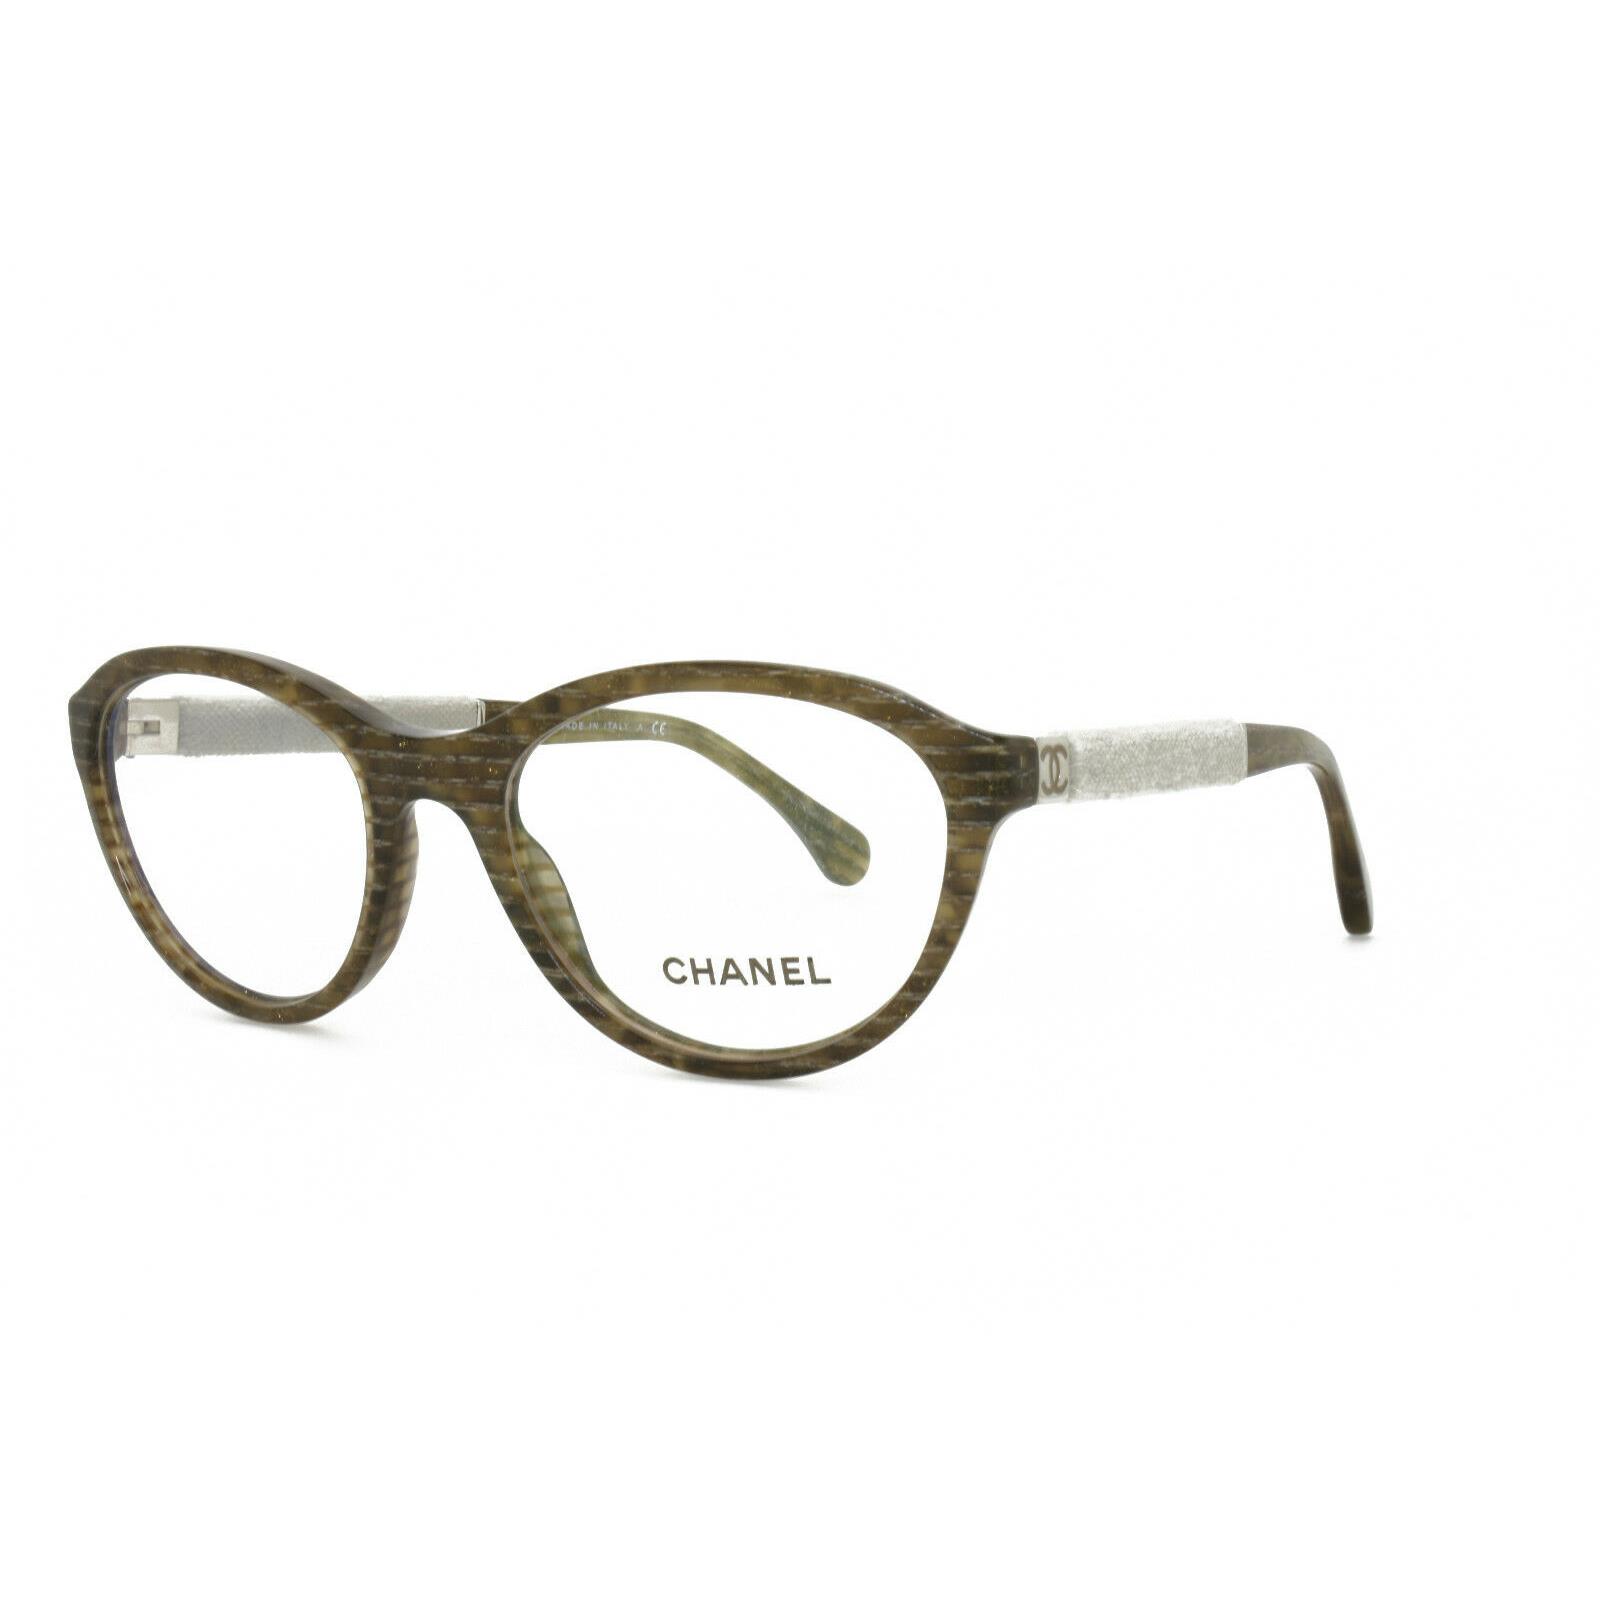 Chanel Eyeglasses 3266 1444 53-18-135 Without Case